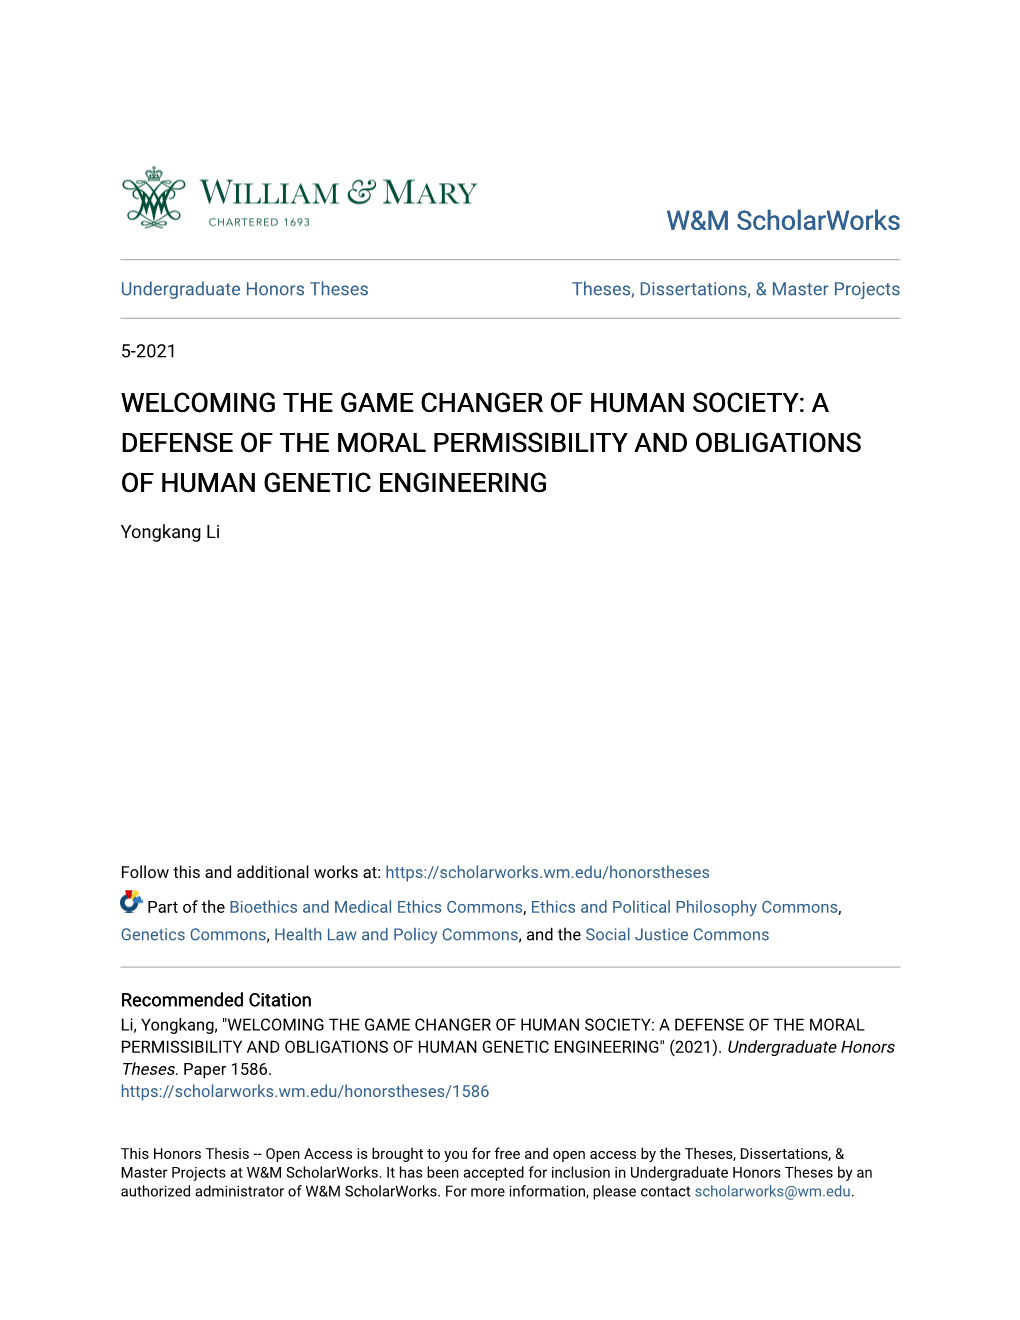 Welcoming the Game Changer of Human Society: a Defense of the Moral Permissibility and Obligations of Human Genetic Engineering